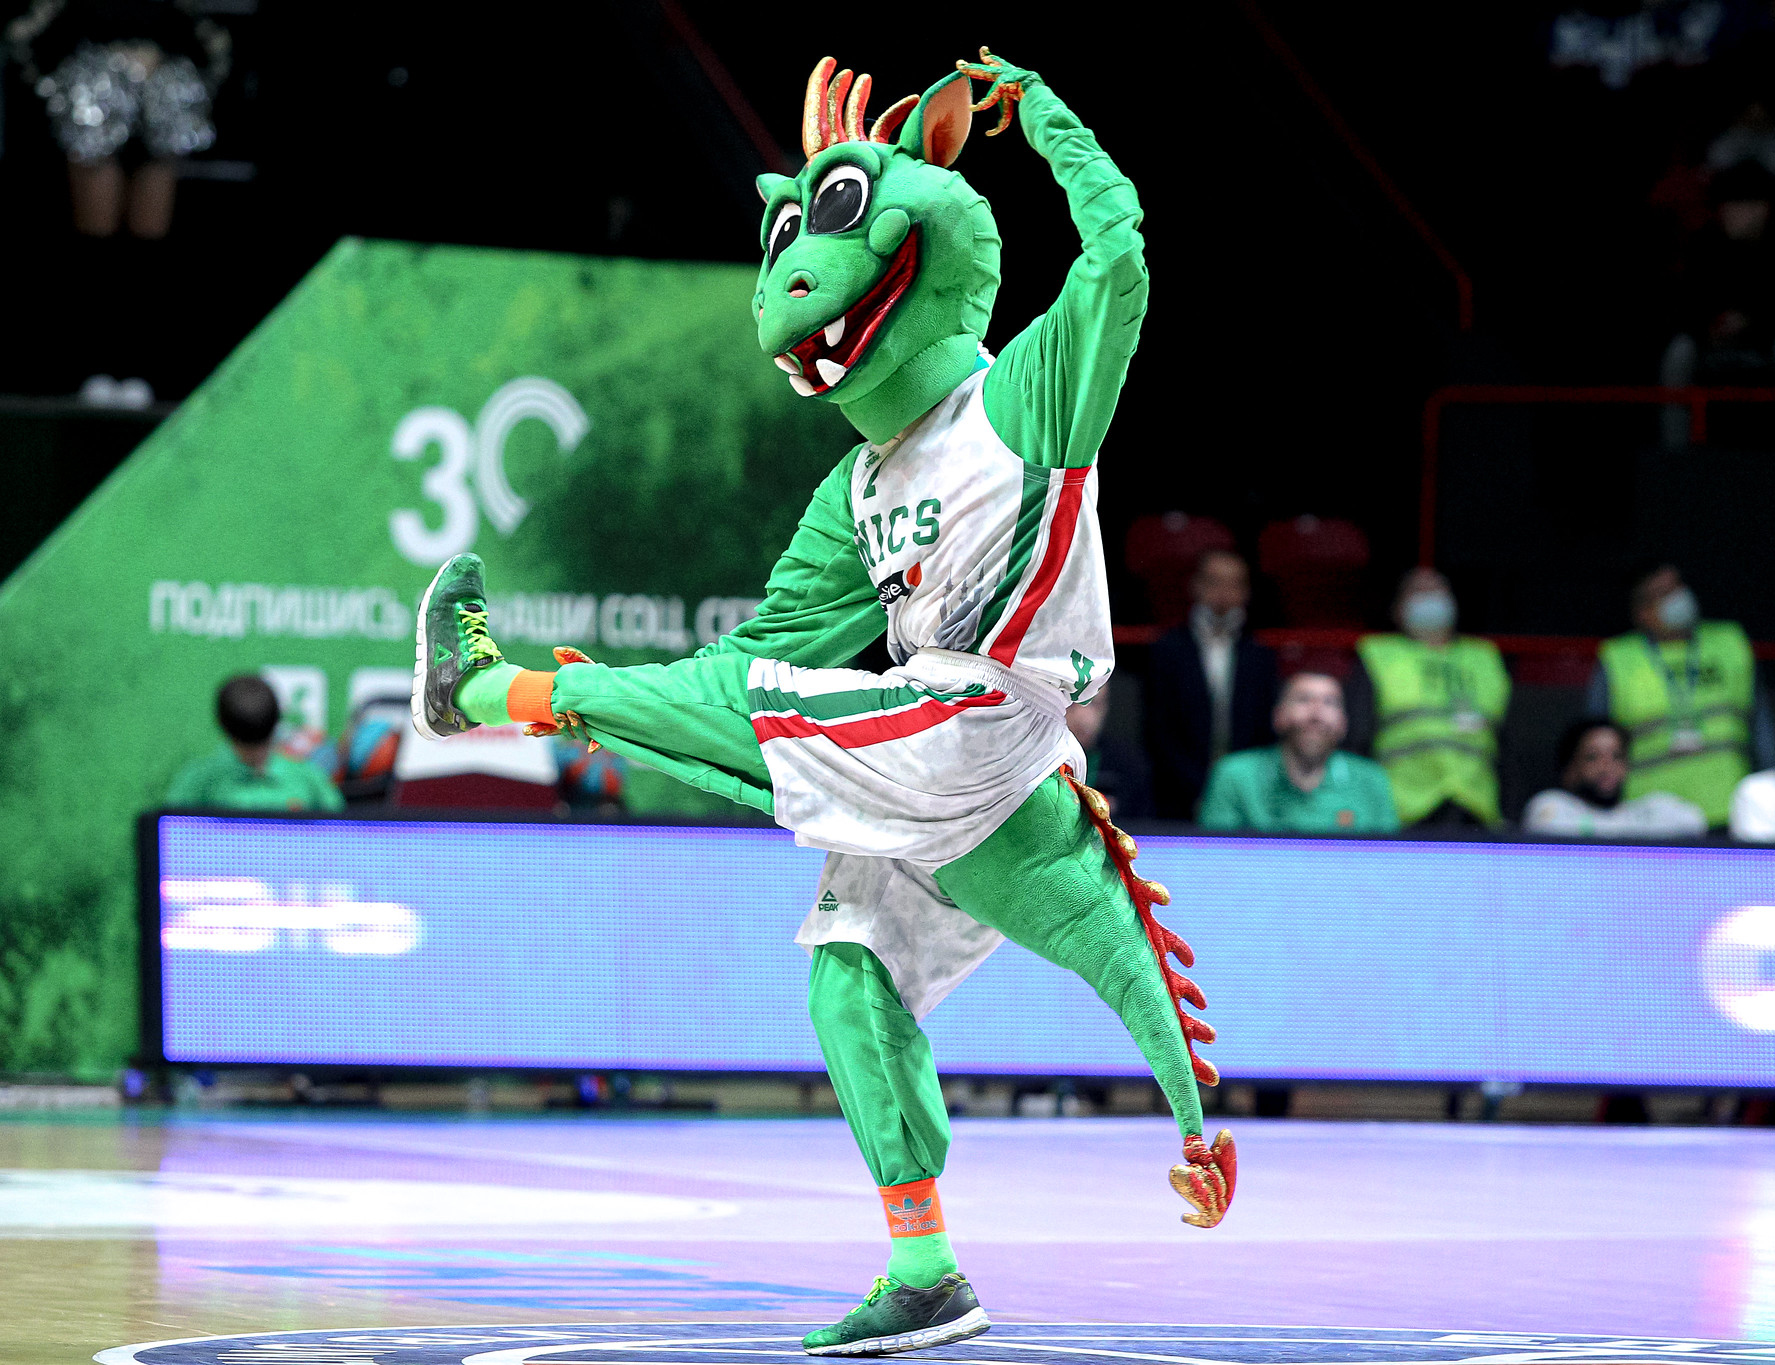 UNICS hosts the Perm team, Astapkovich plays against his former team in Moscow. Preview November 14